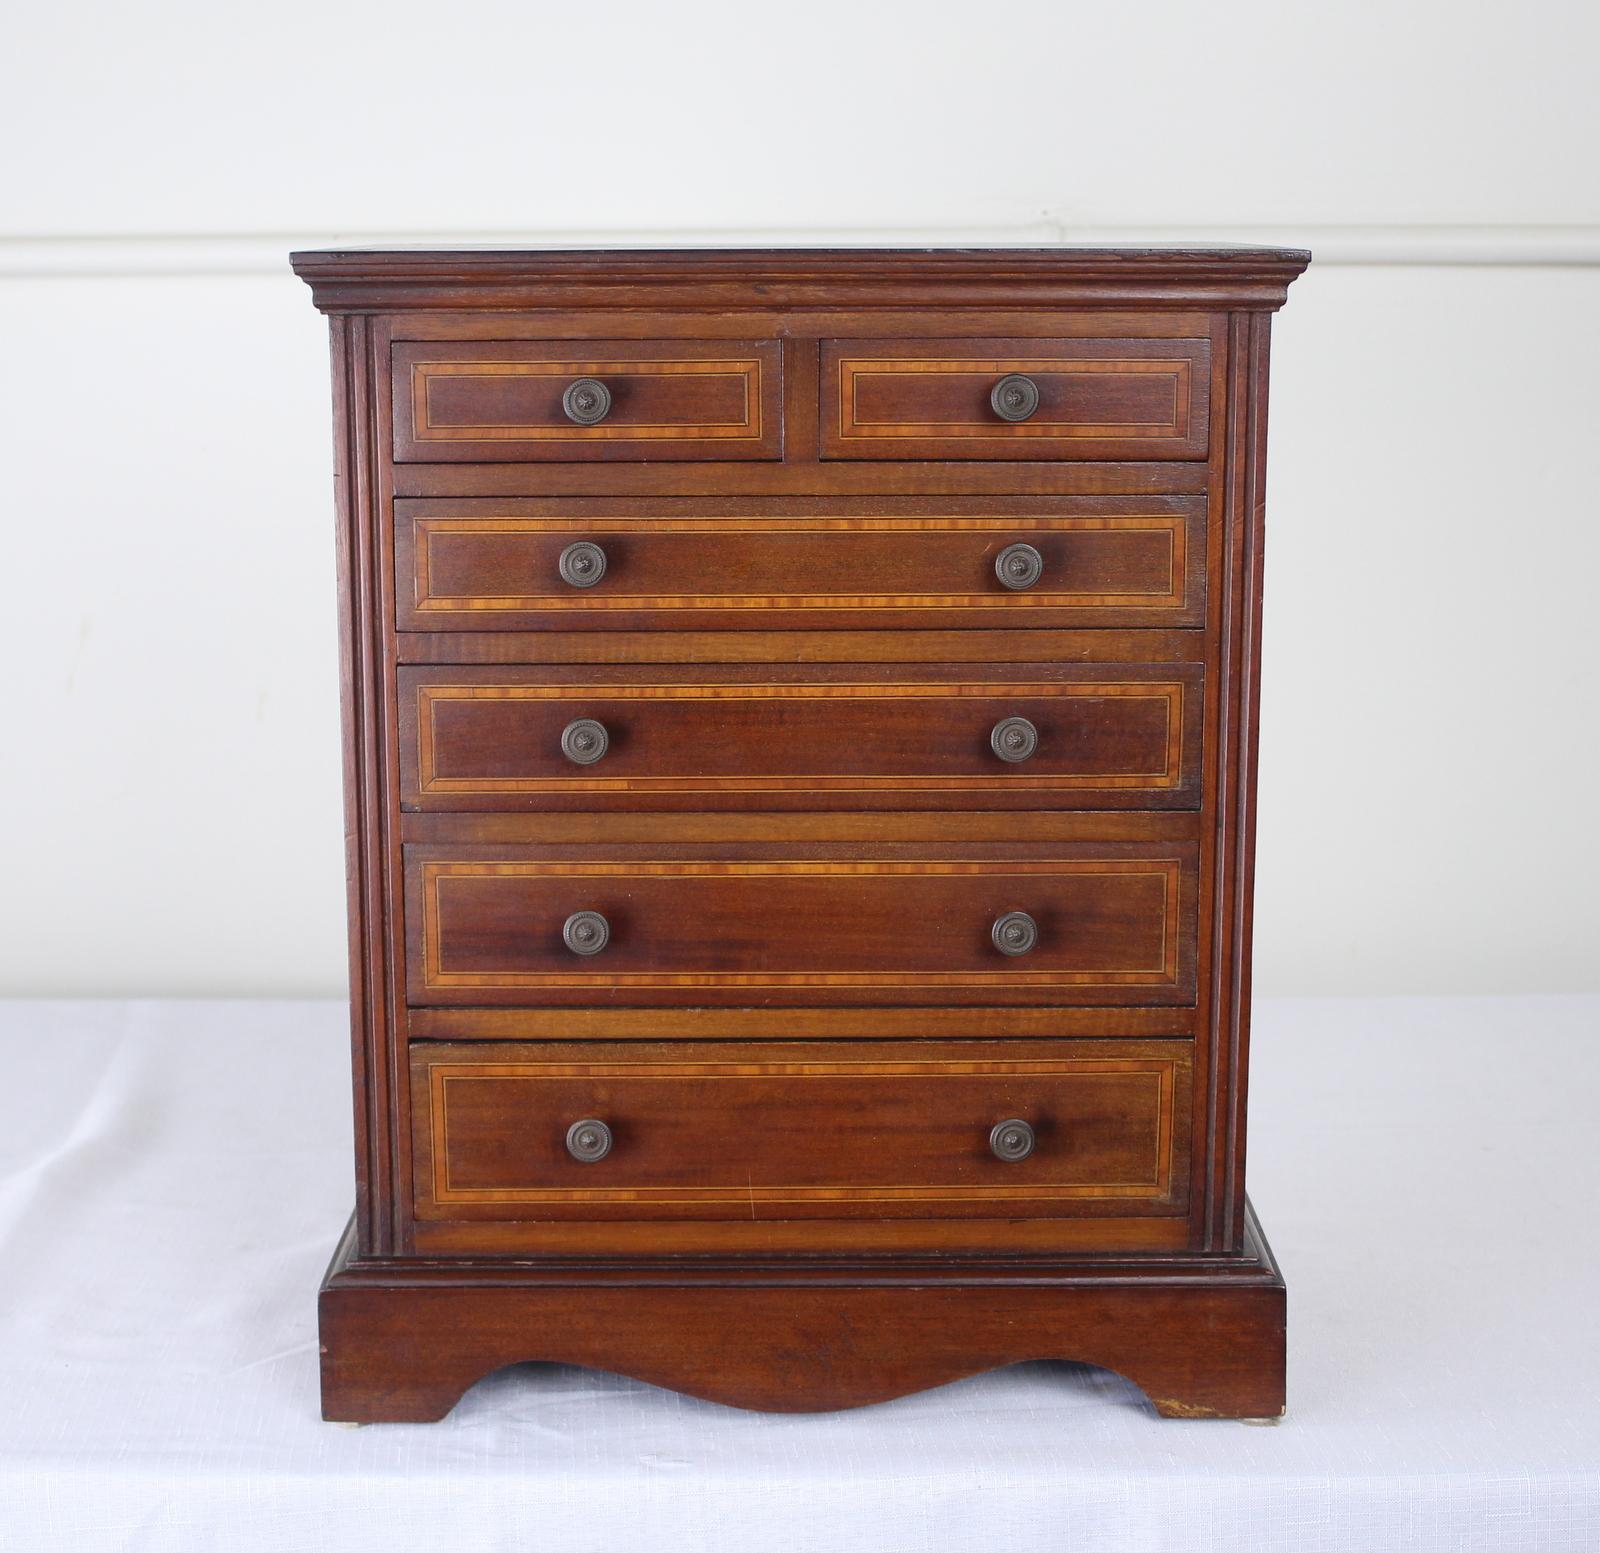 A beautifully made mahogany apprentices' practice chest of drawers with satinwood inlay. Handsome mouldings at top and and carved plinth at the bottom. Lovely antique patina. Great for jewelry or as a decorative conversation starter. Interiors of